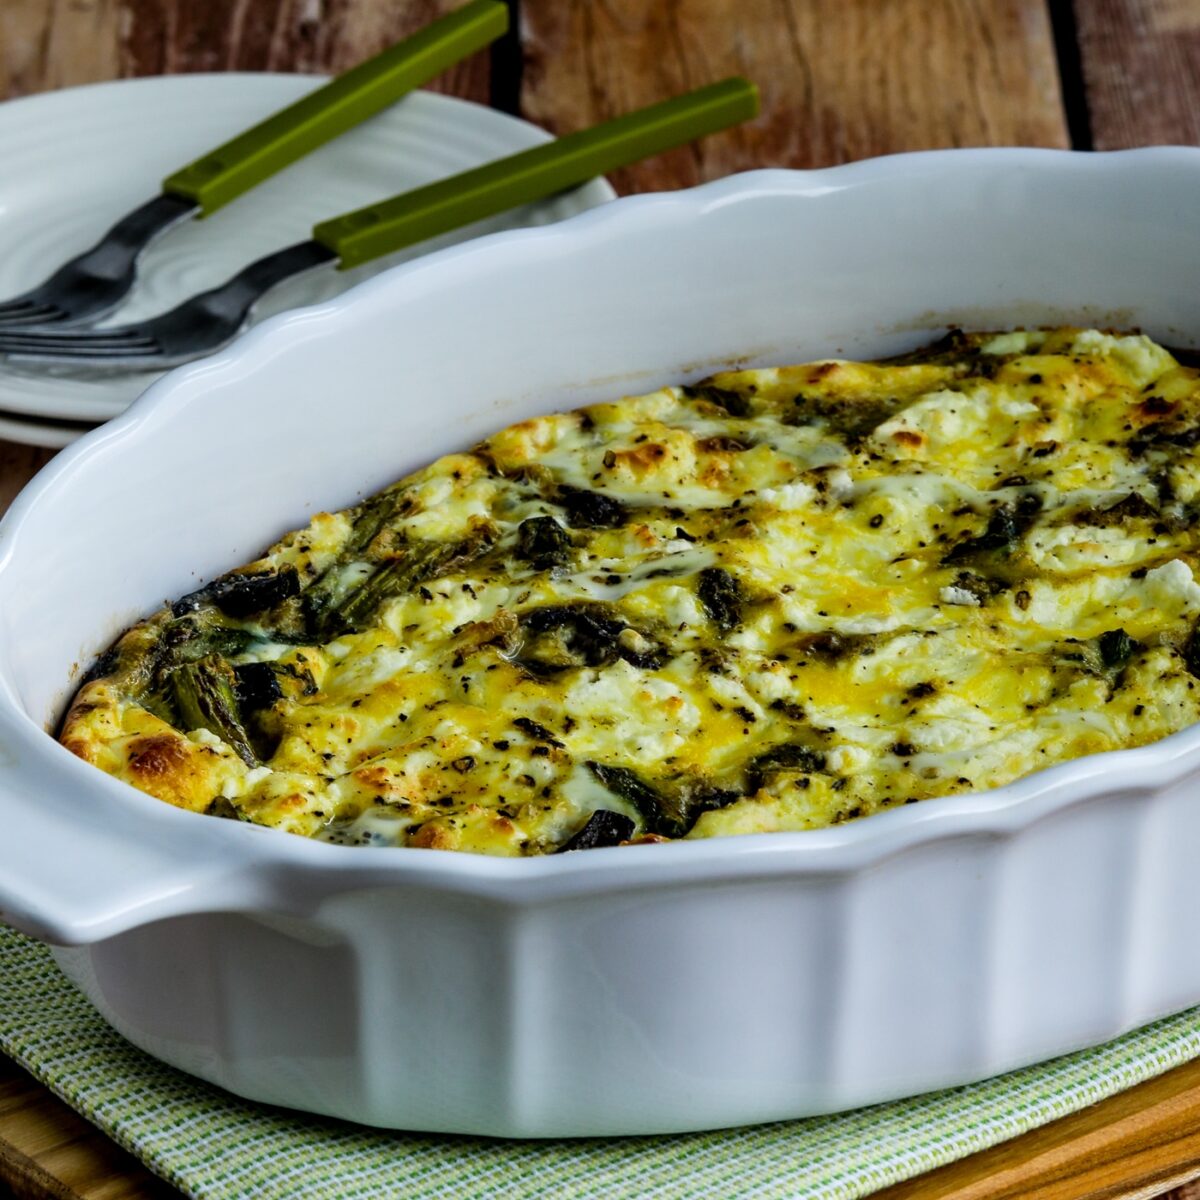 Asparagus, Mushroom, and Goat Cheese Breakfast Casserole thumbnail image shown in baking dish